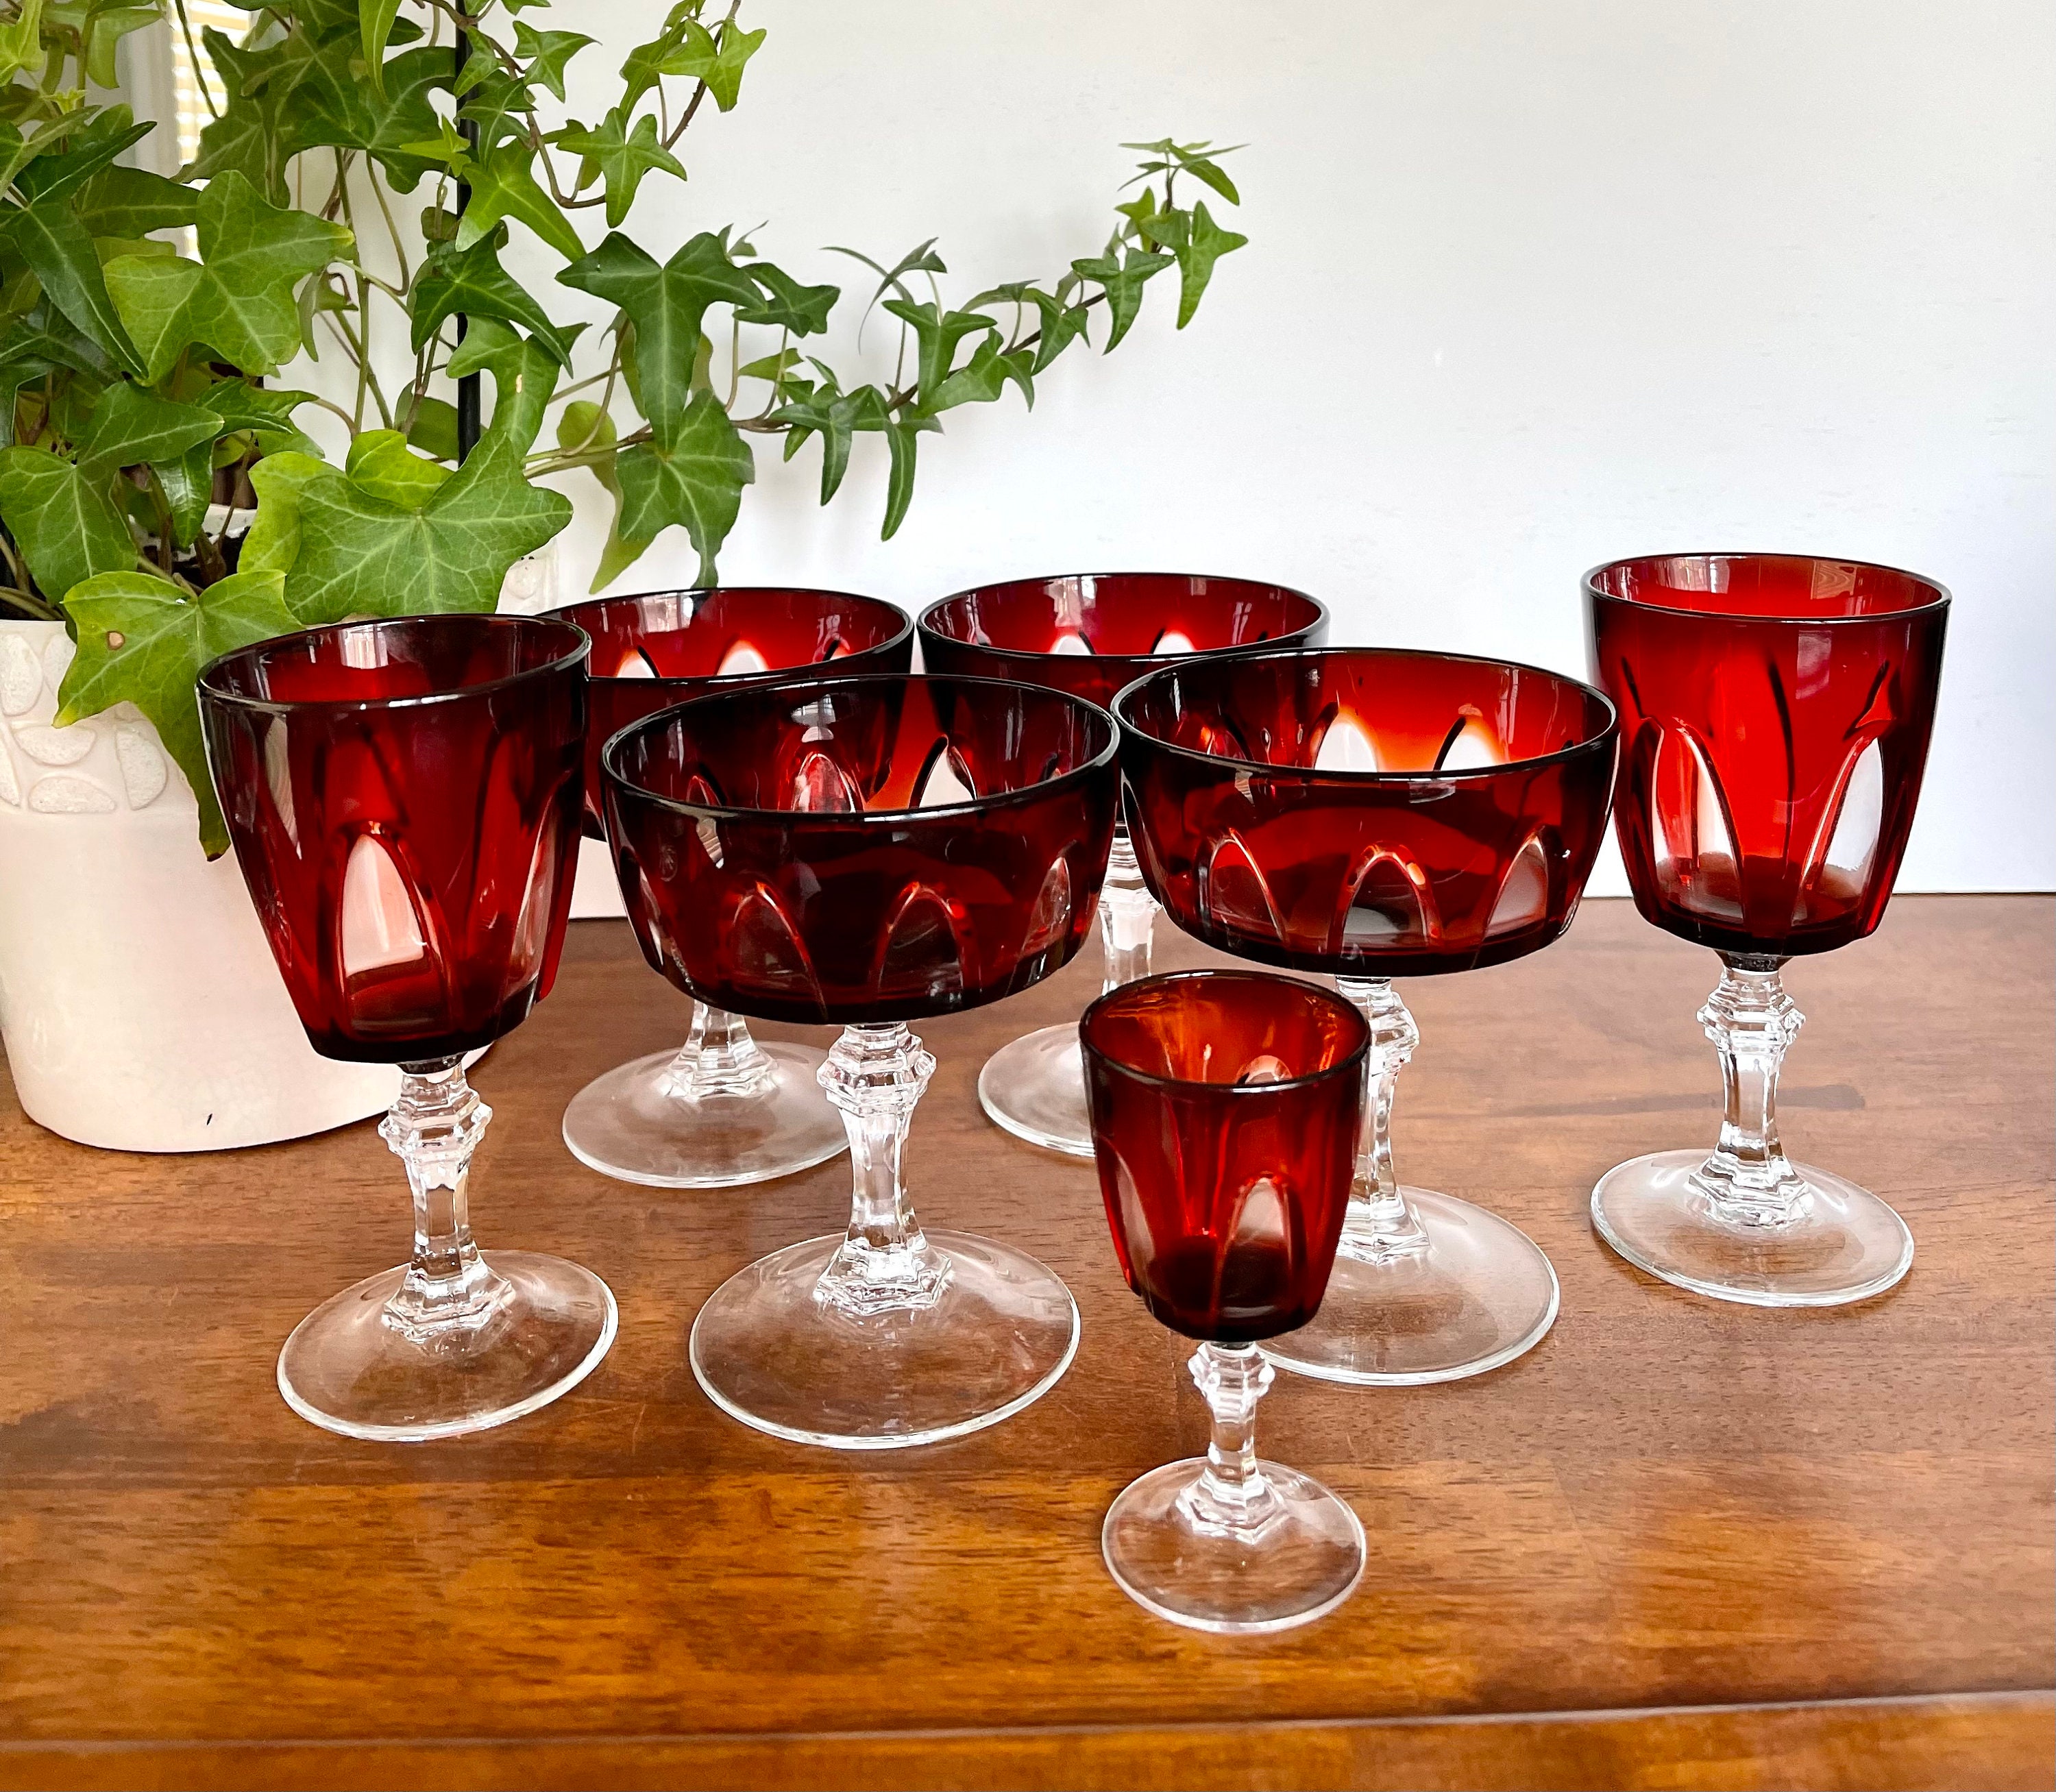 Pair of Tall Red Martini Glasses/red Bowl Clear Stem Cocktail Glasses 